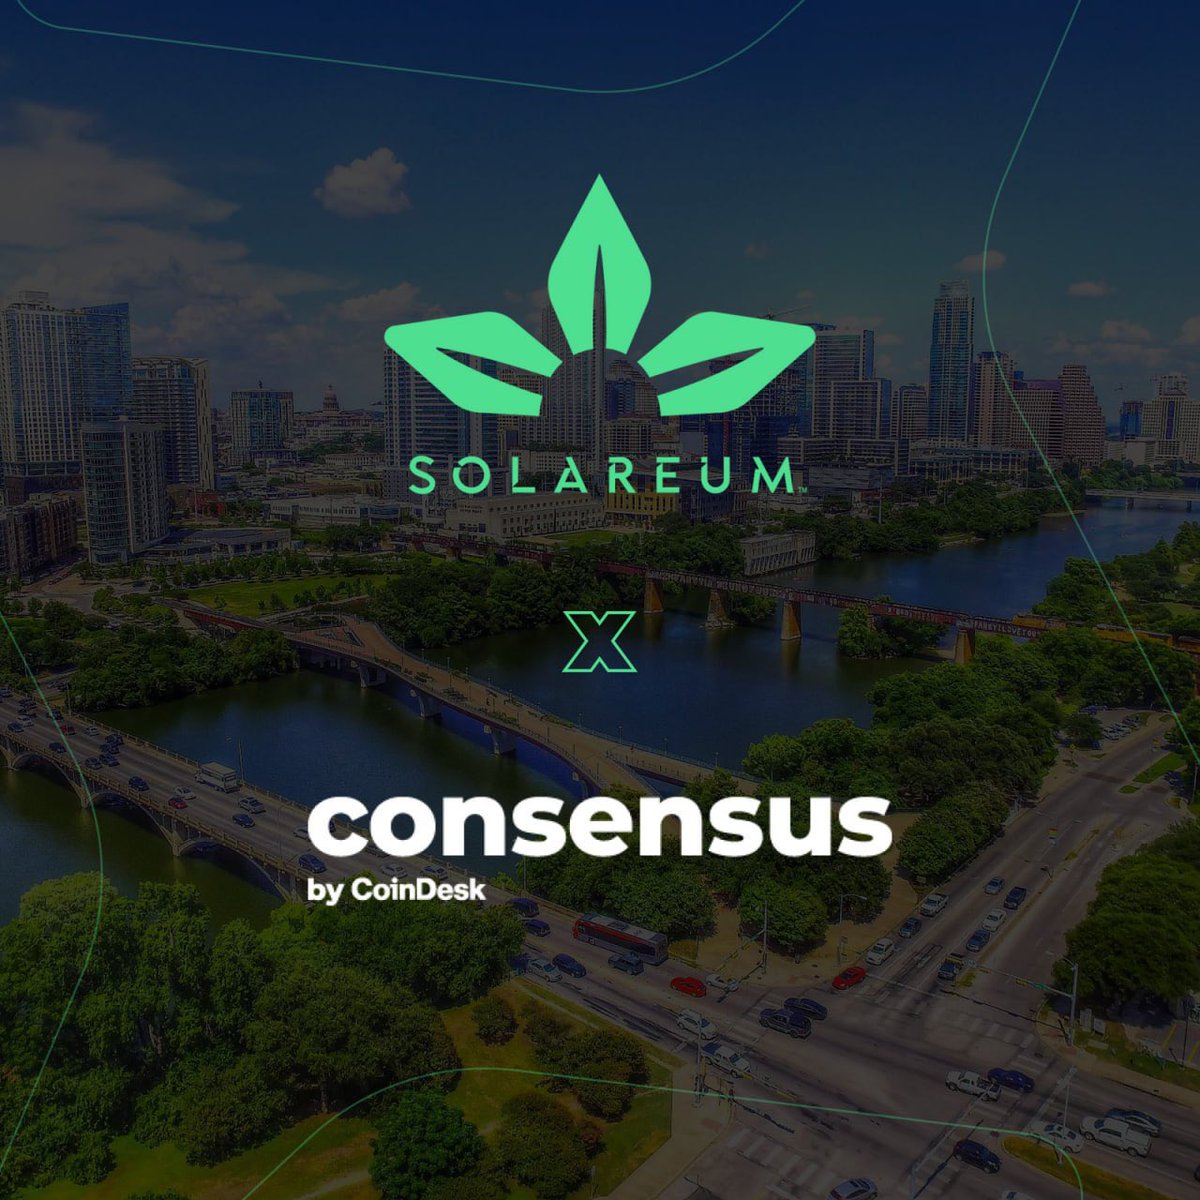 🚀 The Marketing and Business Development team is heading to Austin for @consensus2024 by @CoinDesk! 🌟This event will be a major catalyst for our #surge to the main net launch. Stay tuned! 💥 #DePin #Sustainability #Blockchain #Layer1 #GreenerThanGreen #Energy $SRM